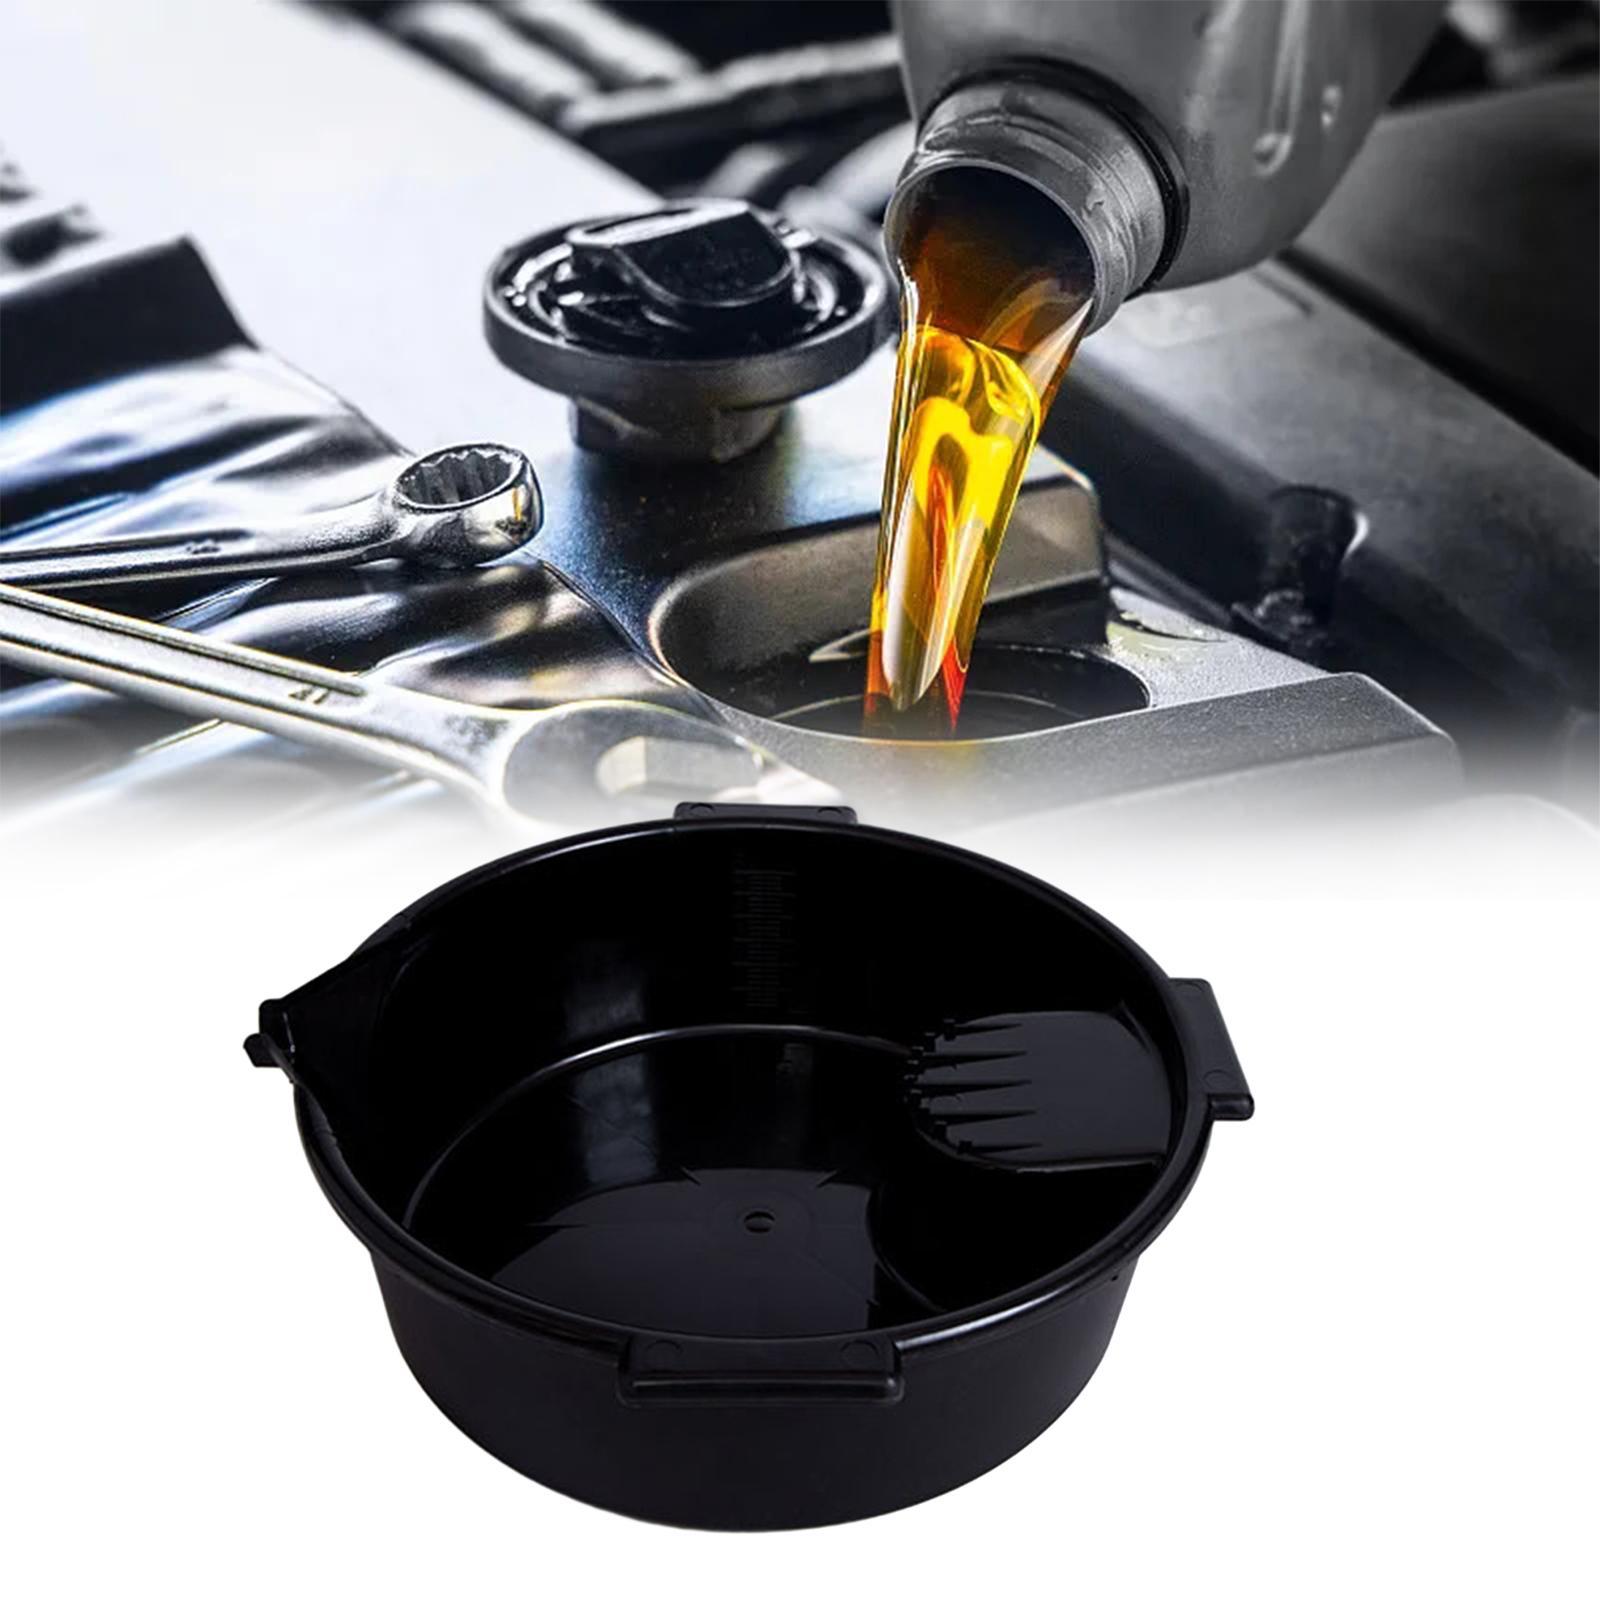 Oil Drain Container Easy Cleaning All Purpose Lightweight Oil Change Pan